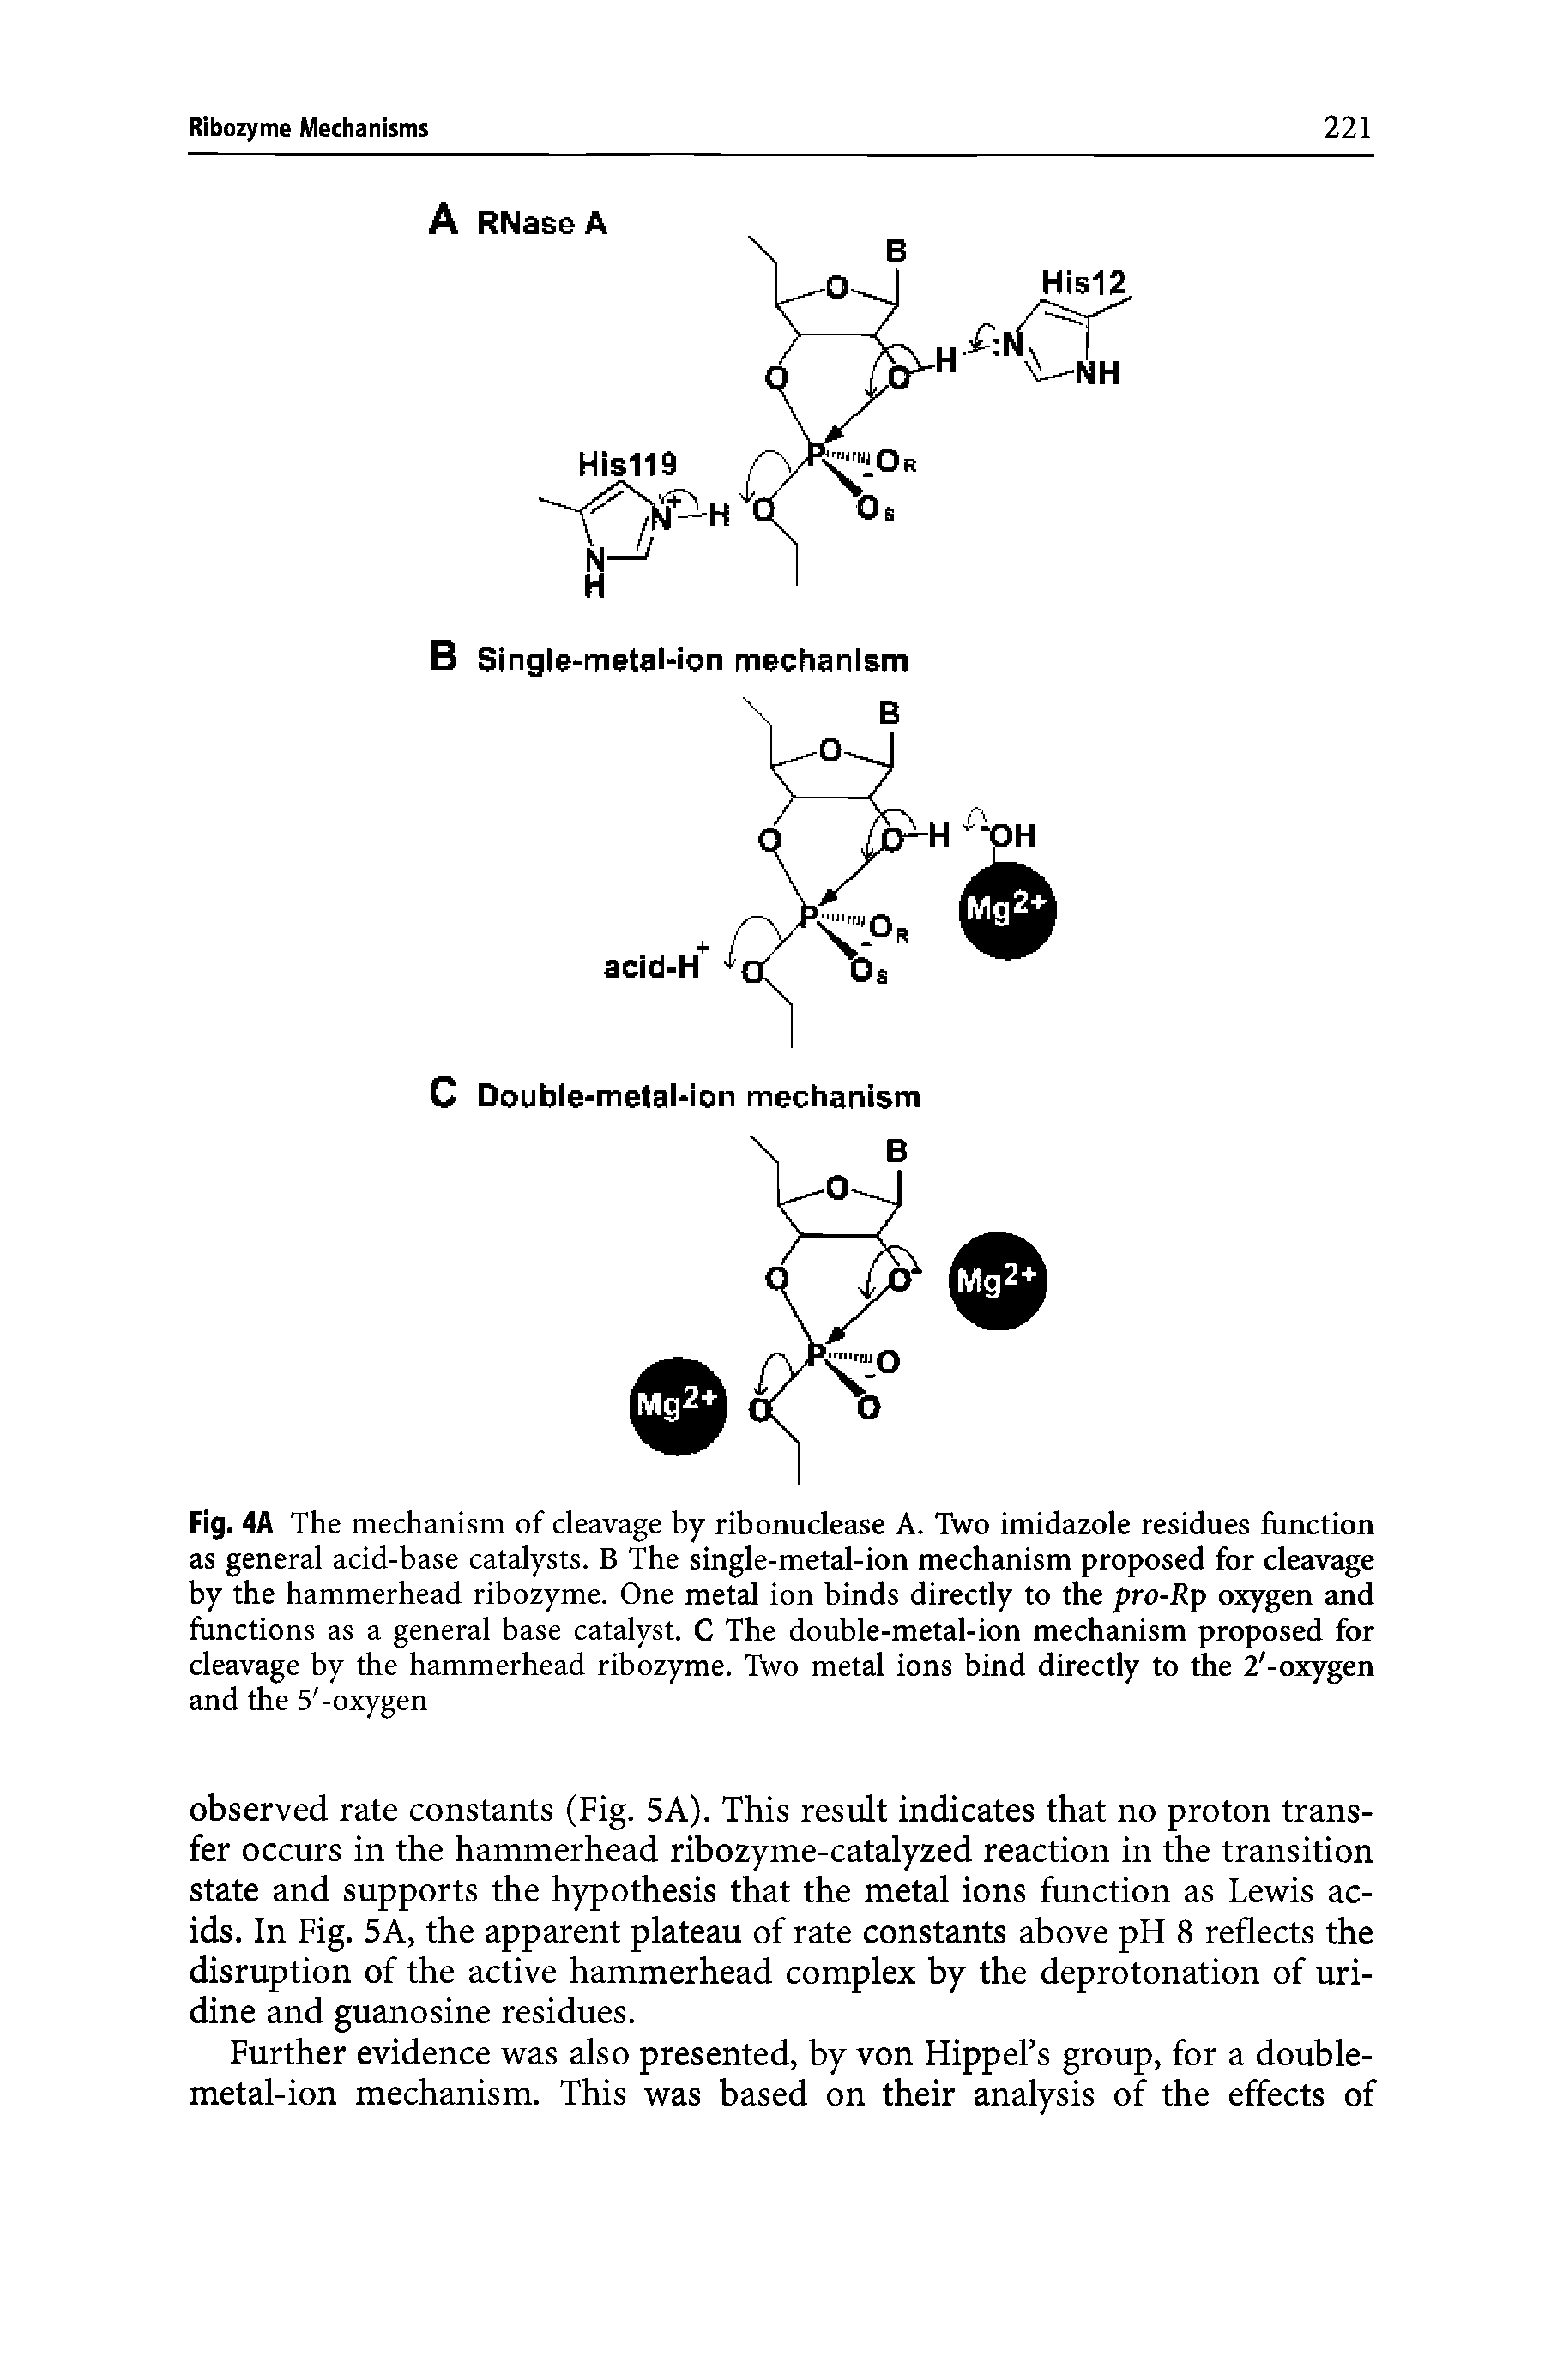 Fig. 4A The mechanism of cleavage by ribonuclease A. Two imidazole residues function as general acid-base catalysts. B The single-metal-ion mechanism proposed for cleavage by the hammerhead ribozyme. One metal ion binds directly to the pro-Rp oxygen and functions as a general base catalyst. C The double-metal-ion mechanism proposed for cleavage by the hammerhead ribozyme. Two metal ions bind directly to the 2 -oxygen and the 5 -oxygen...